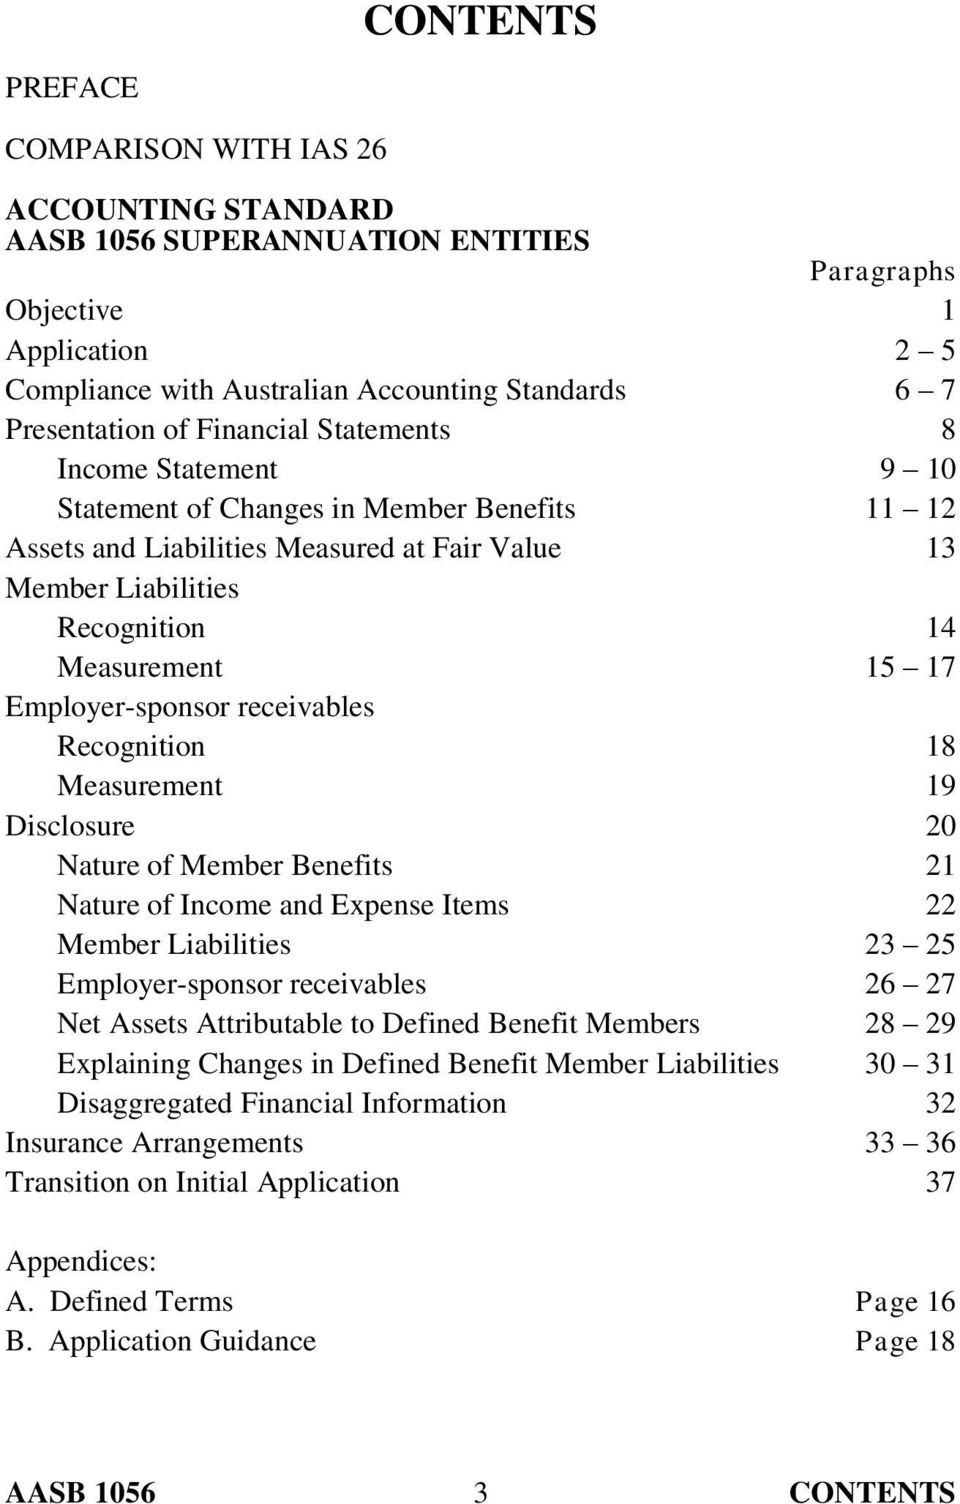 Employer-sponsor receivables Recognition 18 Measurement 19 Disclosure 20 Nature of Member Benefits 21 Nature of Income and Expense Items 22 Member Liabilities 23 25 Employer-sponsor receivables 26 27